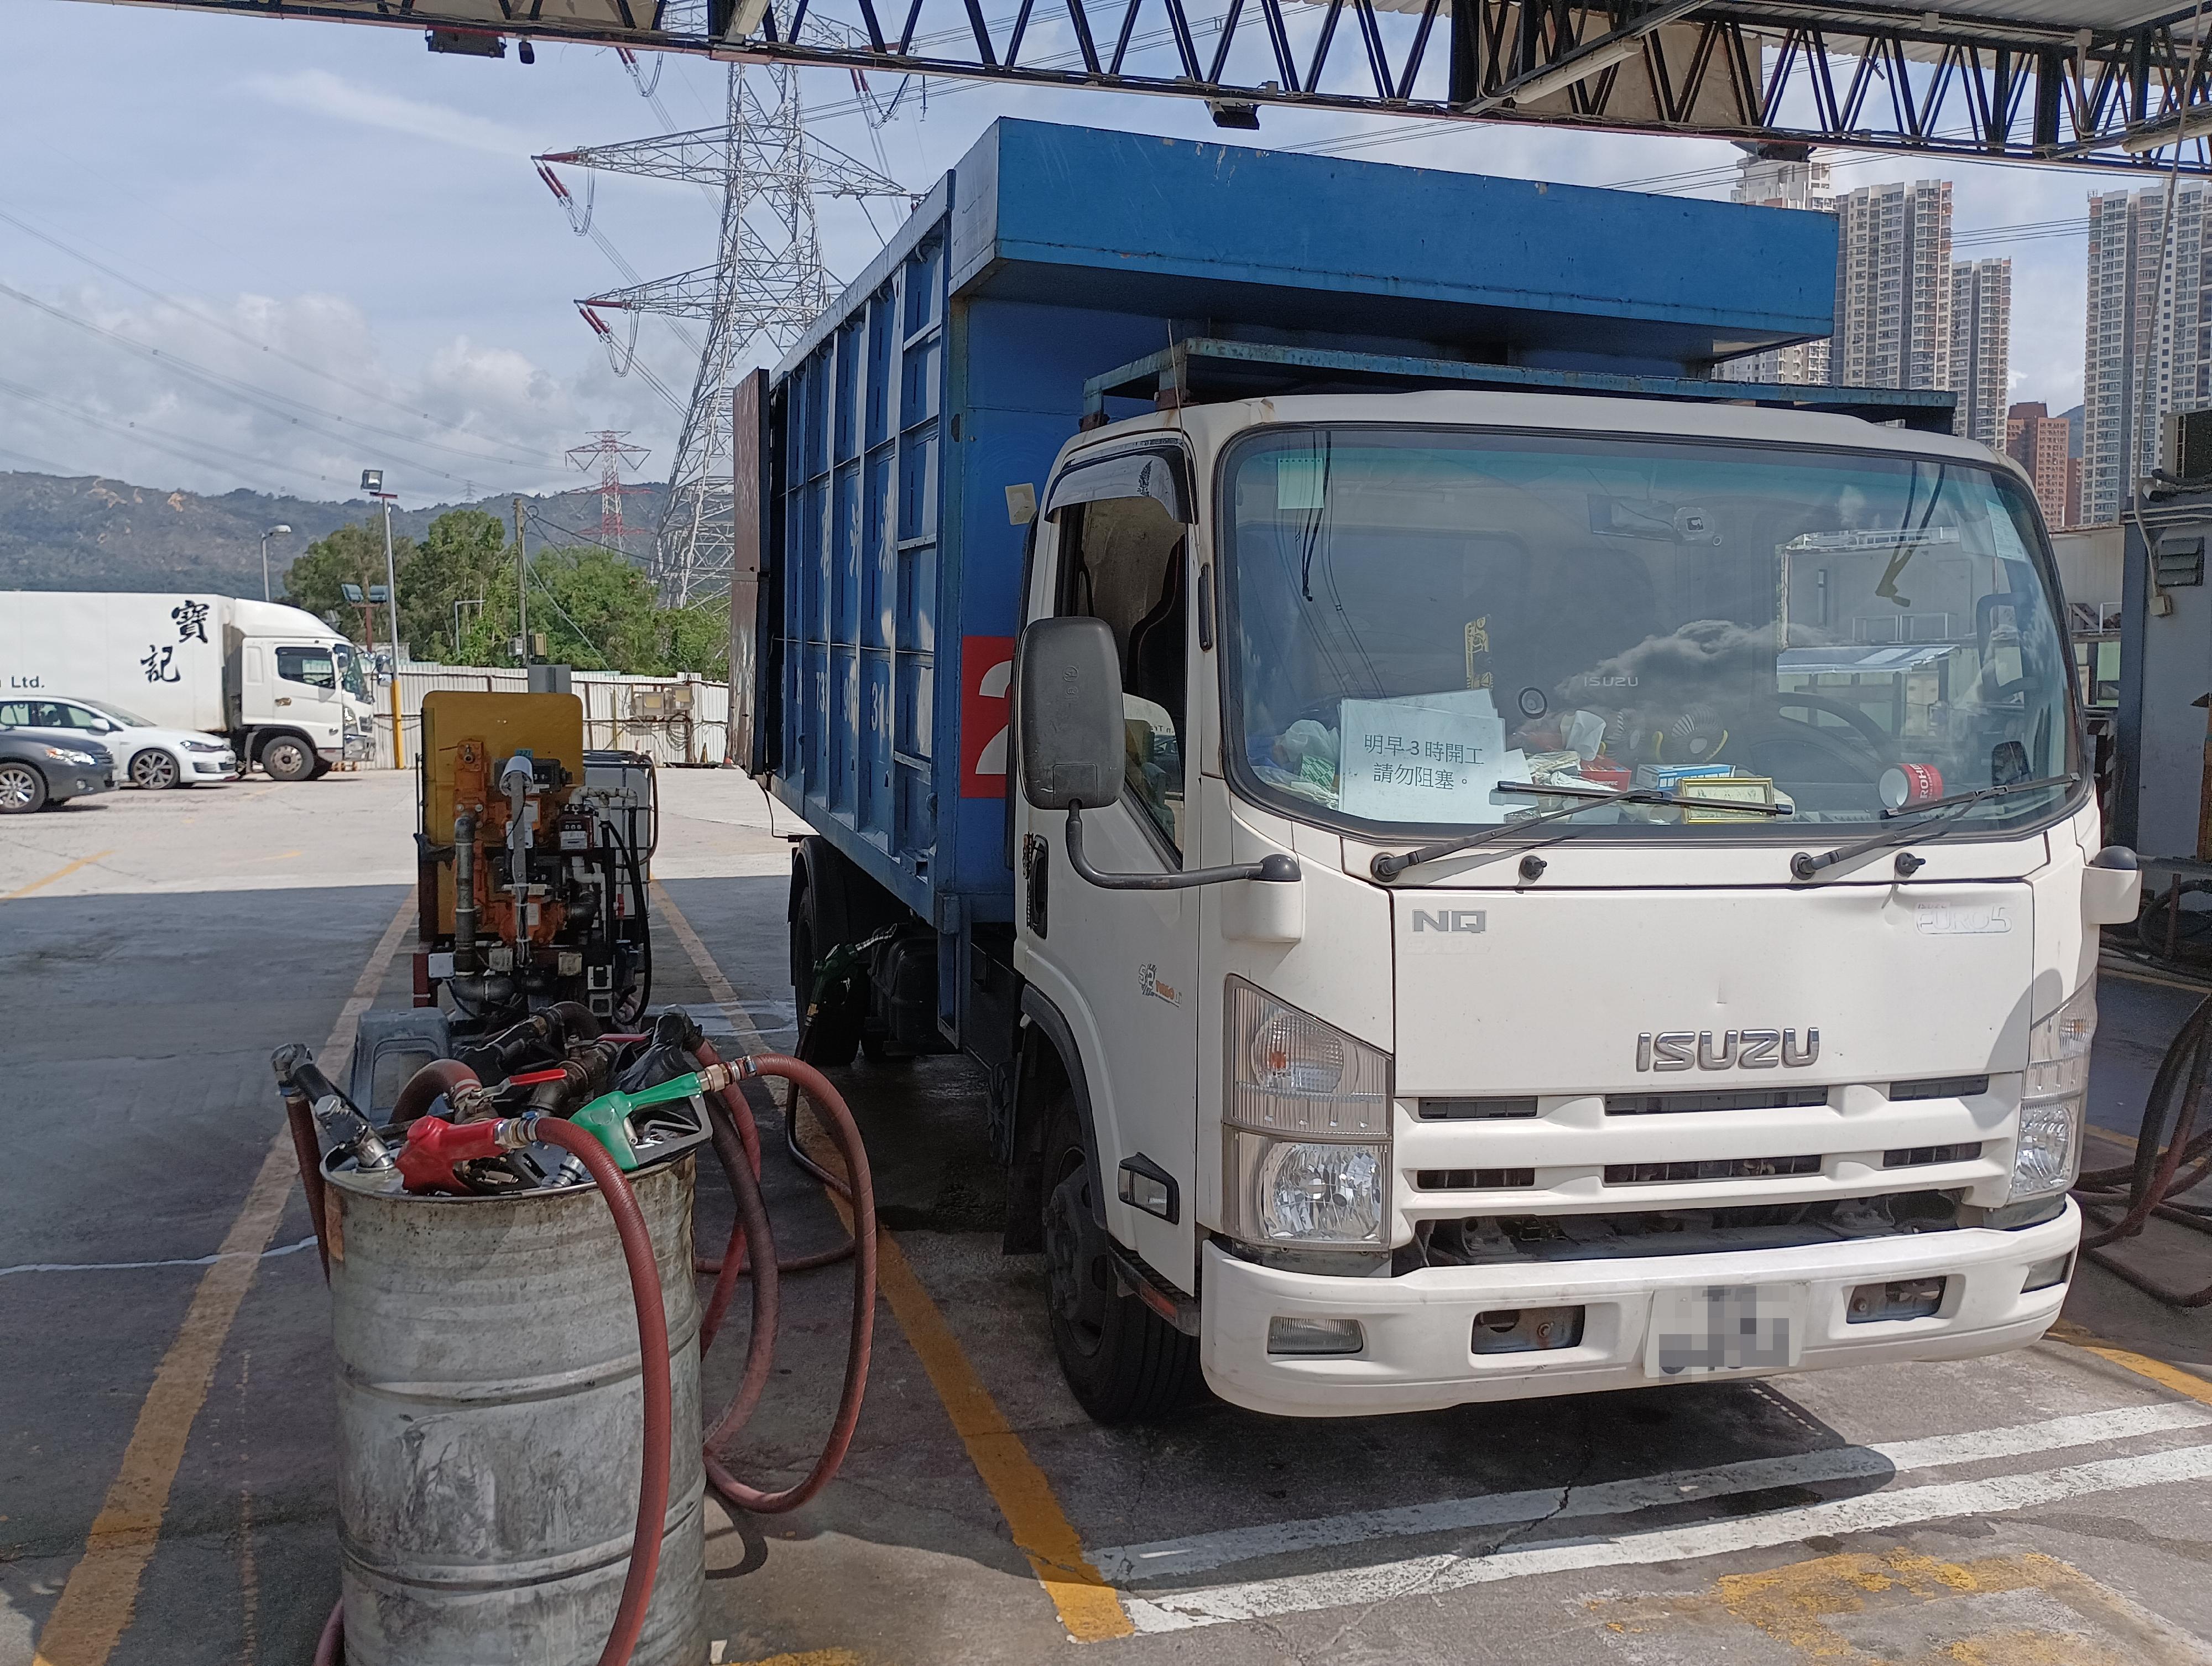 The Fire Services Department, the Hong Kong Police Force and Hong Kong Customs mounted a territory-wide joint operation codenamed "Fire Thunder" from September 27 to 29 to combat illicit fuelling activities. Photo shows a light goods vehicle suspected to be involved in illicit fuelling activities.
